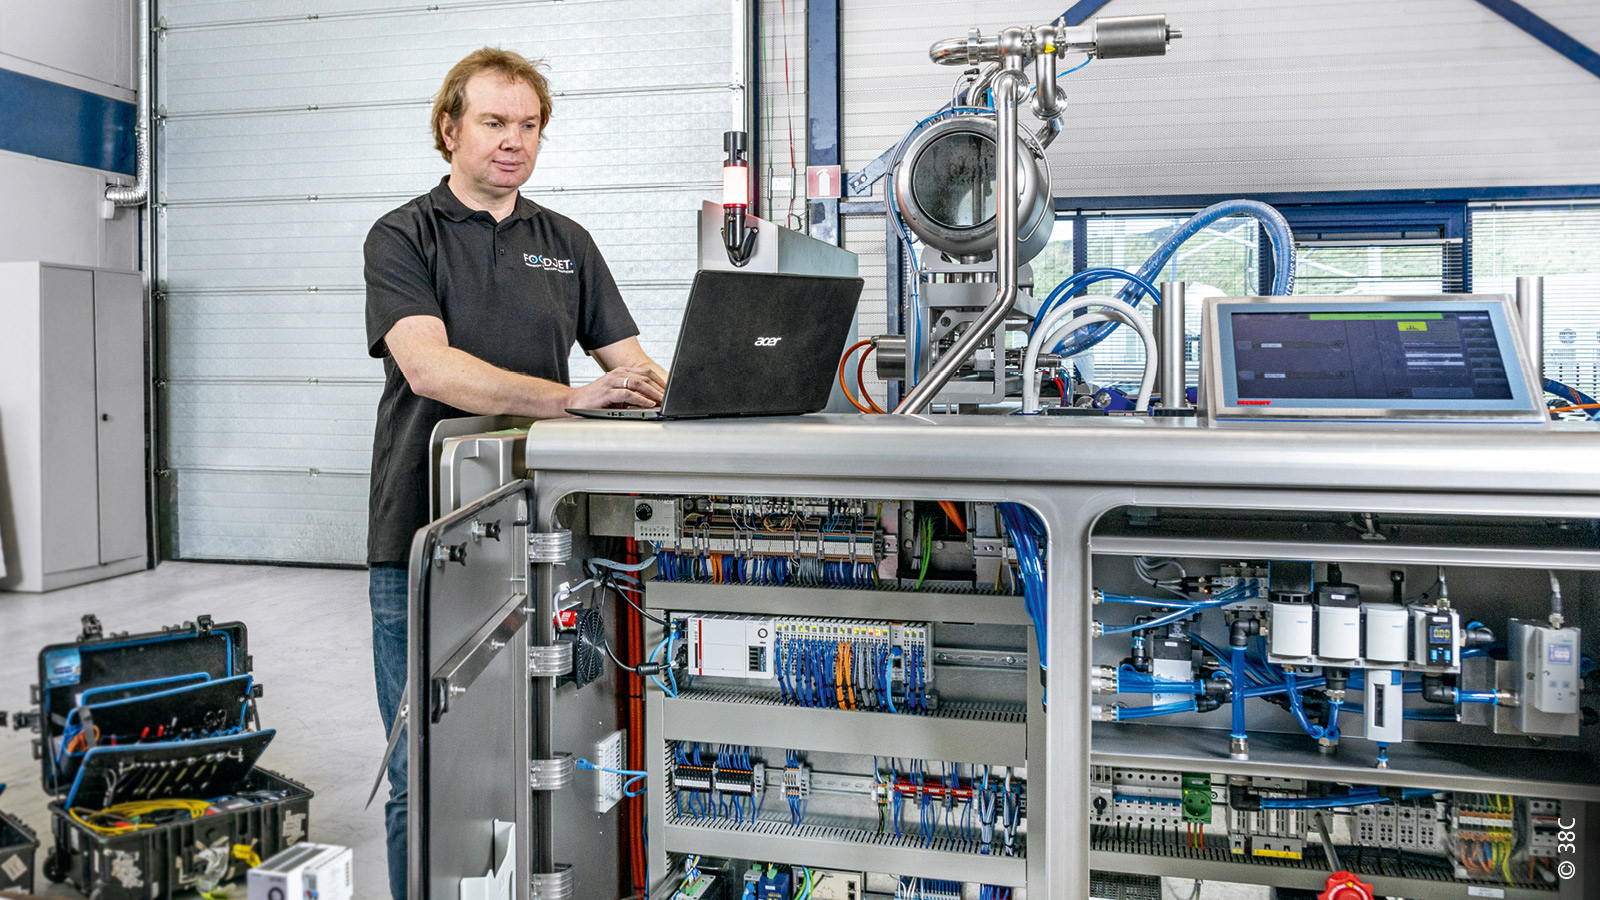 Foodjet engineer Ed de Leur setting up an MDL system: “We have to push just the right amount of sauce through dozens of nozzles at just the right moment. I couldn’t think of a more suitable platform to handle this challenging task than PC-based control.”  